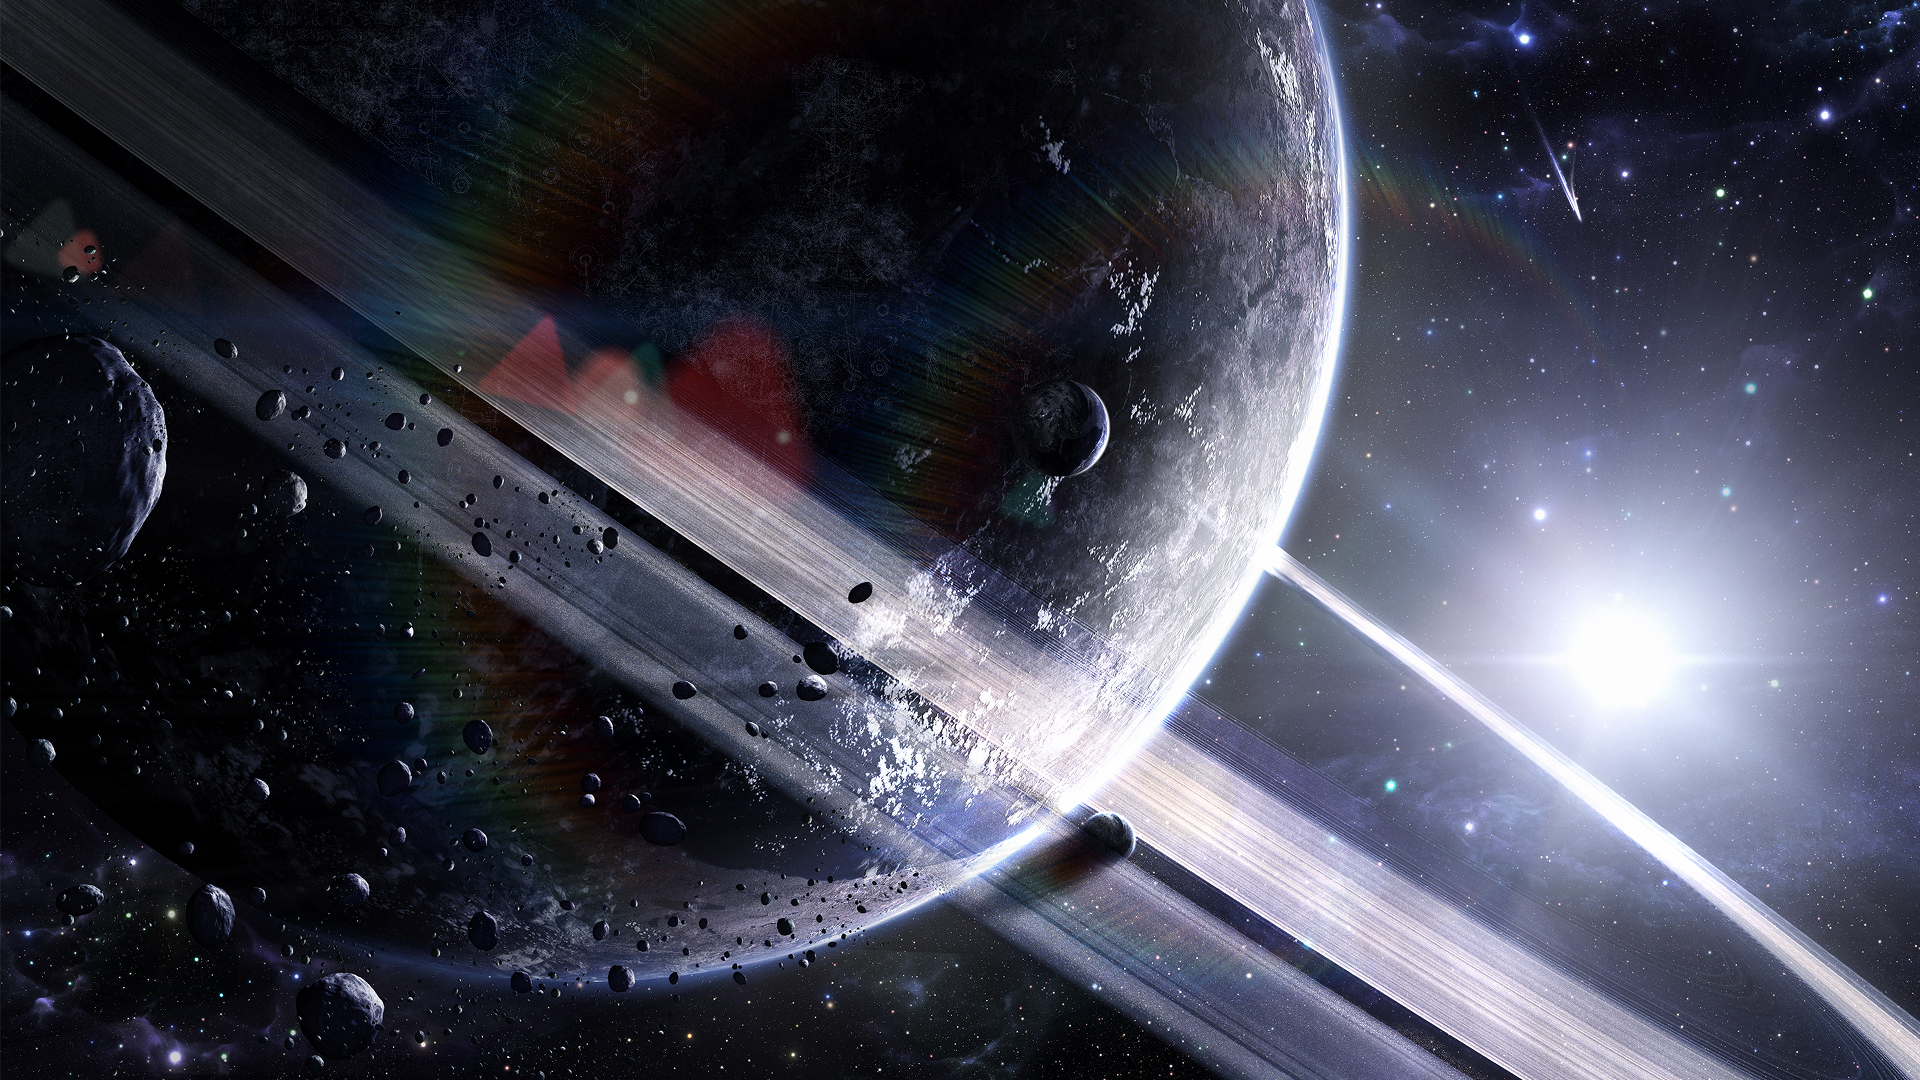 1920 x 1080 Wallpapers Full HD Wallpapers 1080p 15396 3d space scene